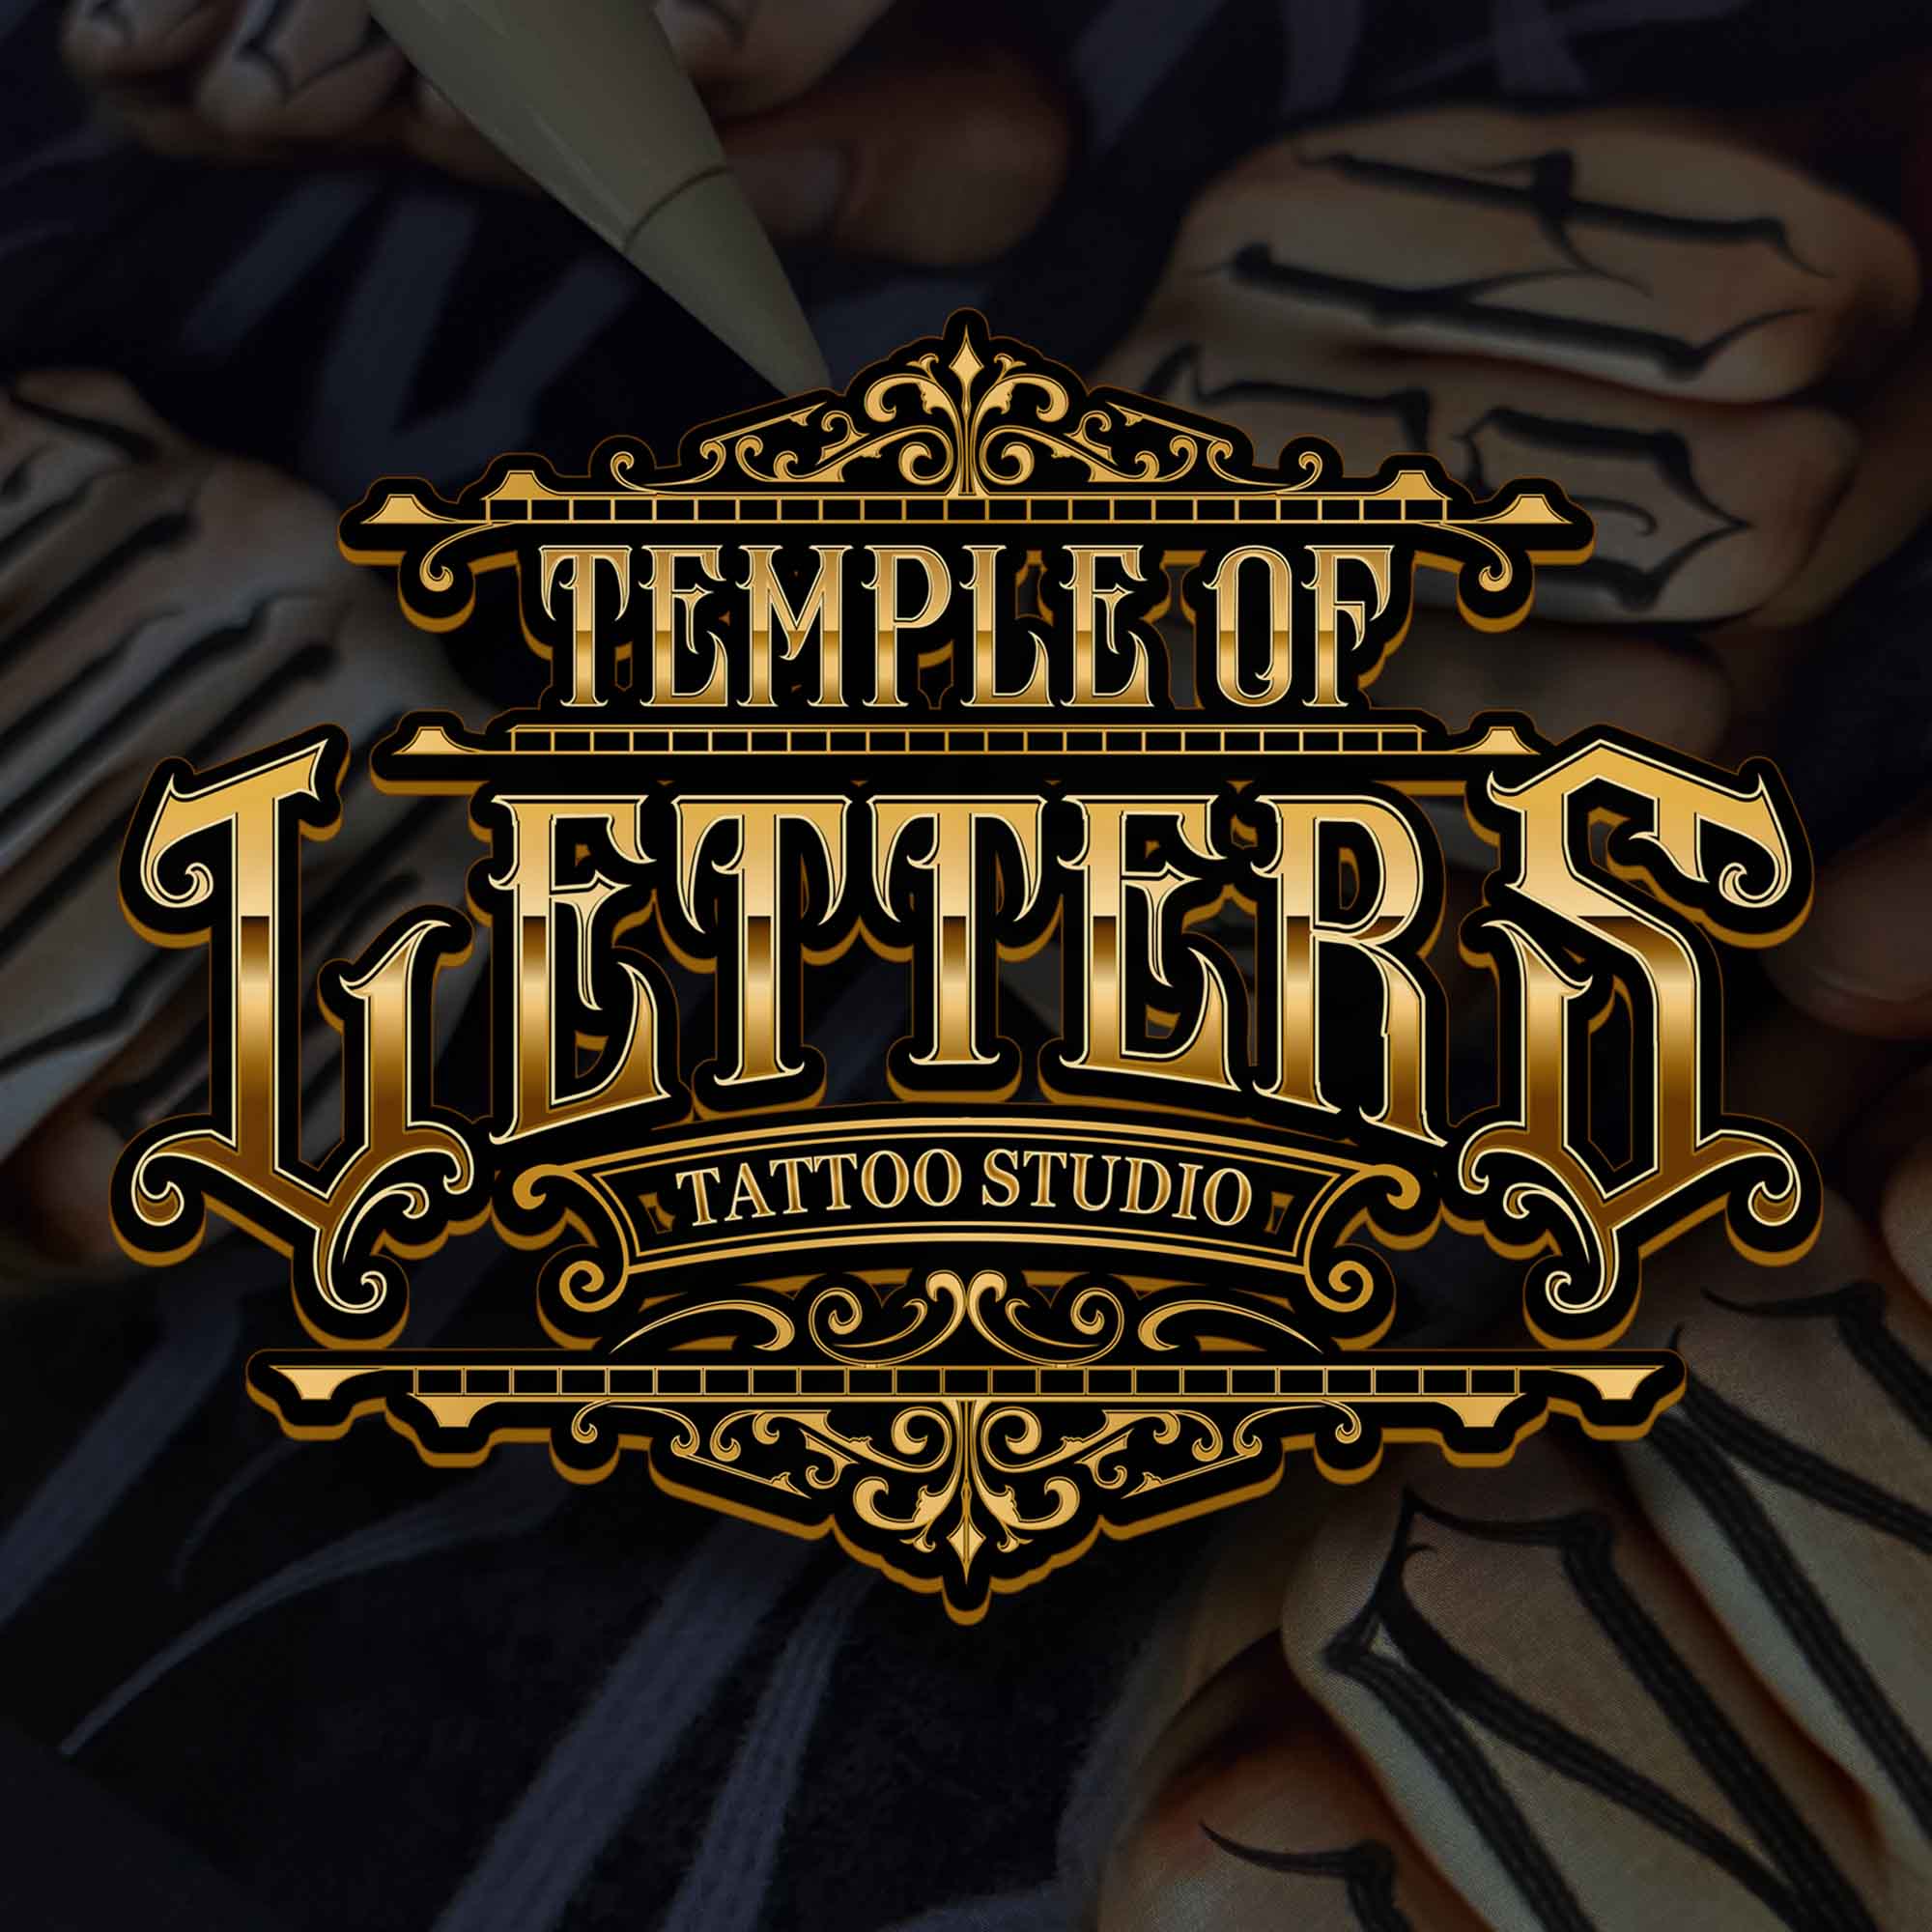 LOYALTY up for grabs as a tattoo!  #script#oldenglish#scriptenglish#letras#customlettering#calligraphy# lettering#chicago#chicagotattooar... | Instagram